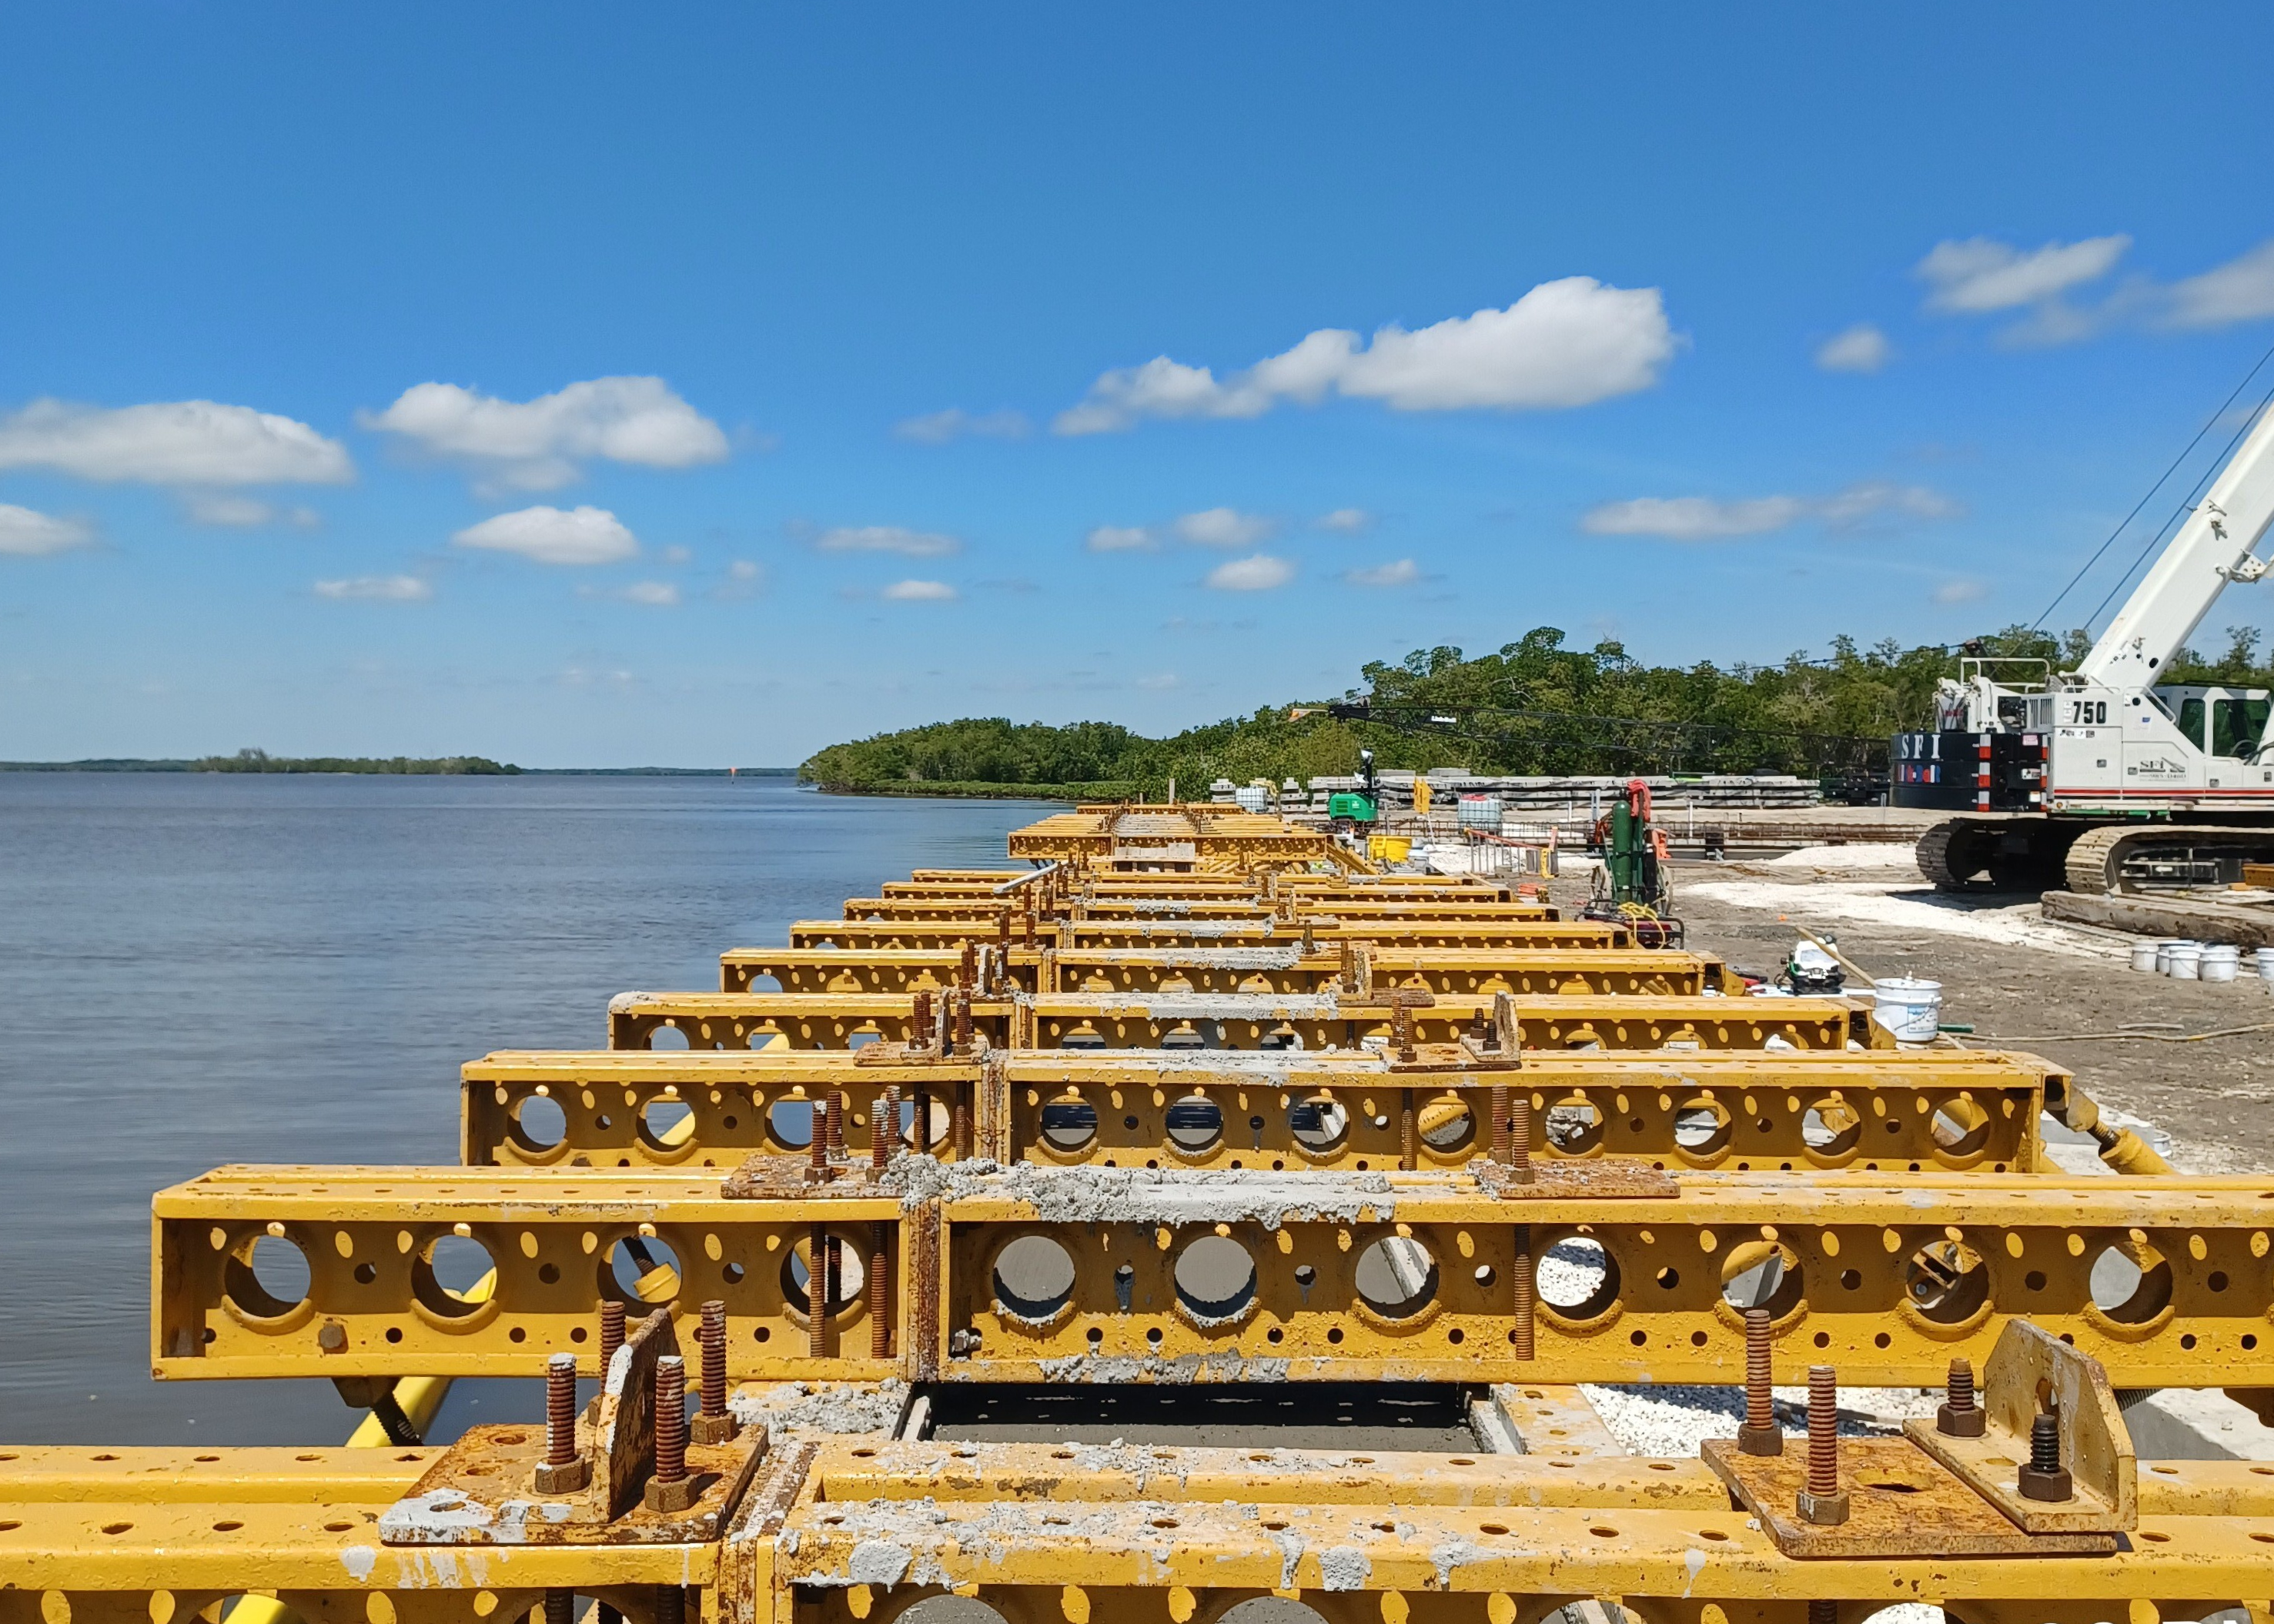 Large horizontal yellow forms are lined up in place for pouring concrete to construct a seawall. View of the open water and trees lining the distant shoreline.